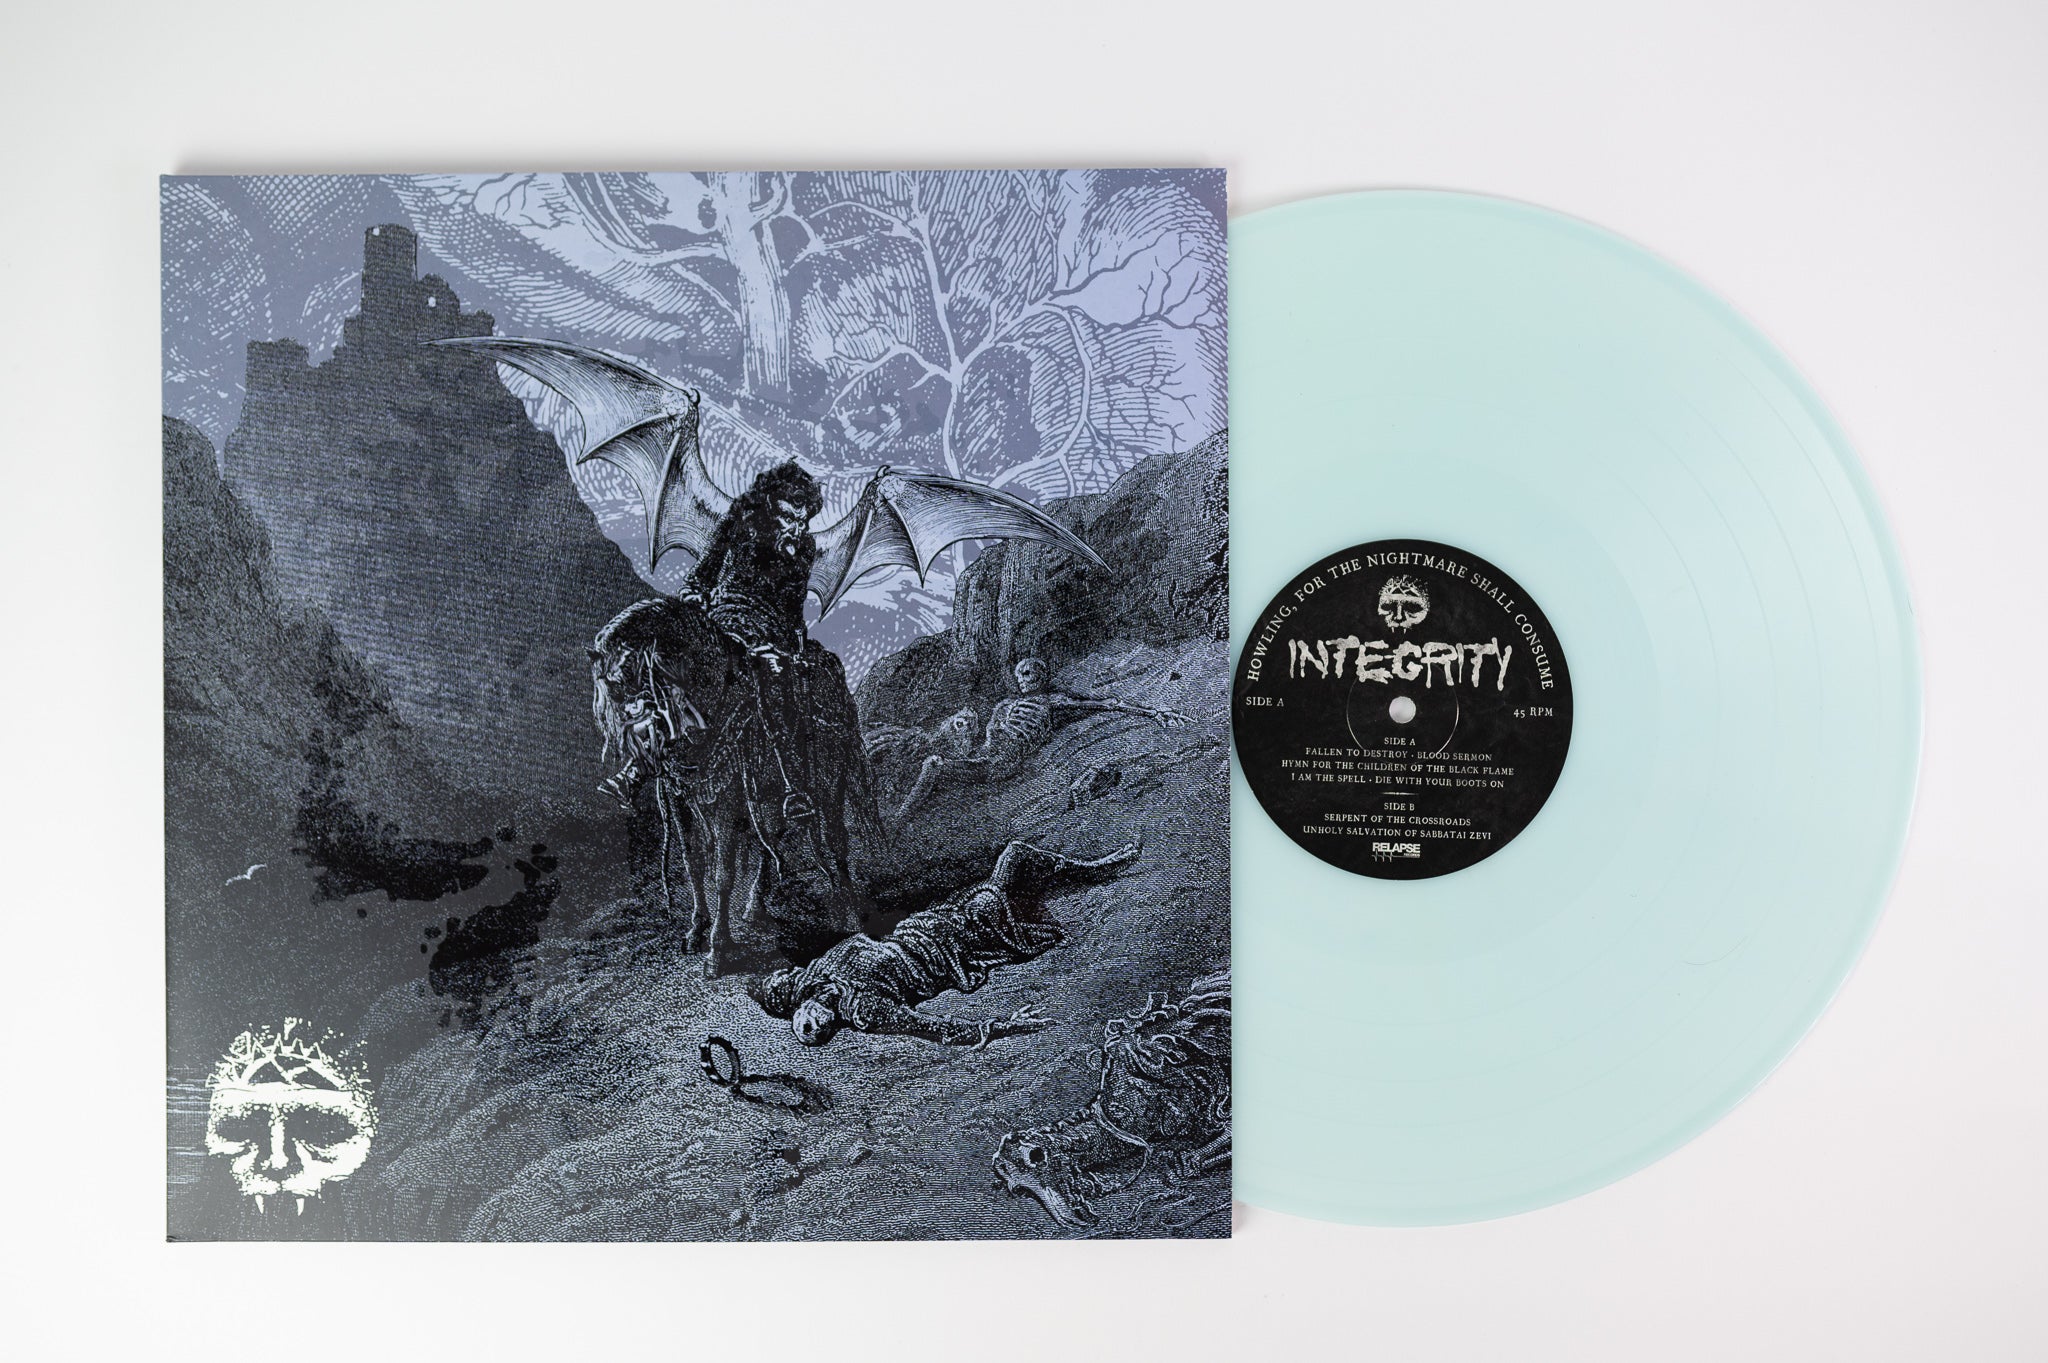 Integrity - Howling For The Nightmare Shall Consume on Relapse Colored Vinyl